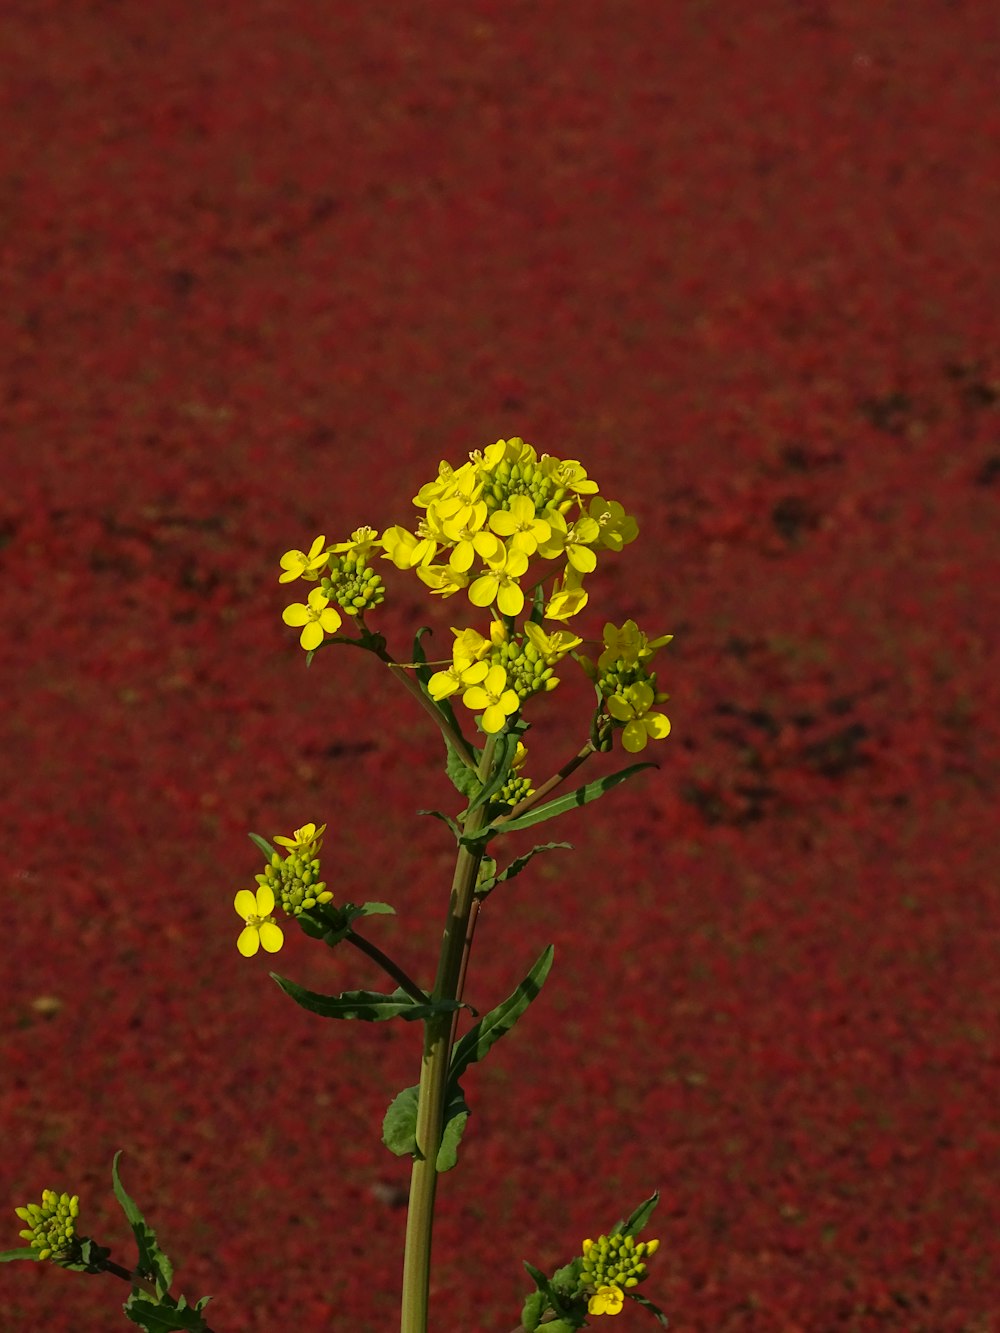 a plant with yellow flowers in front of a red background